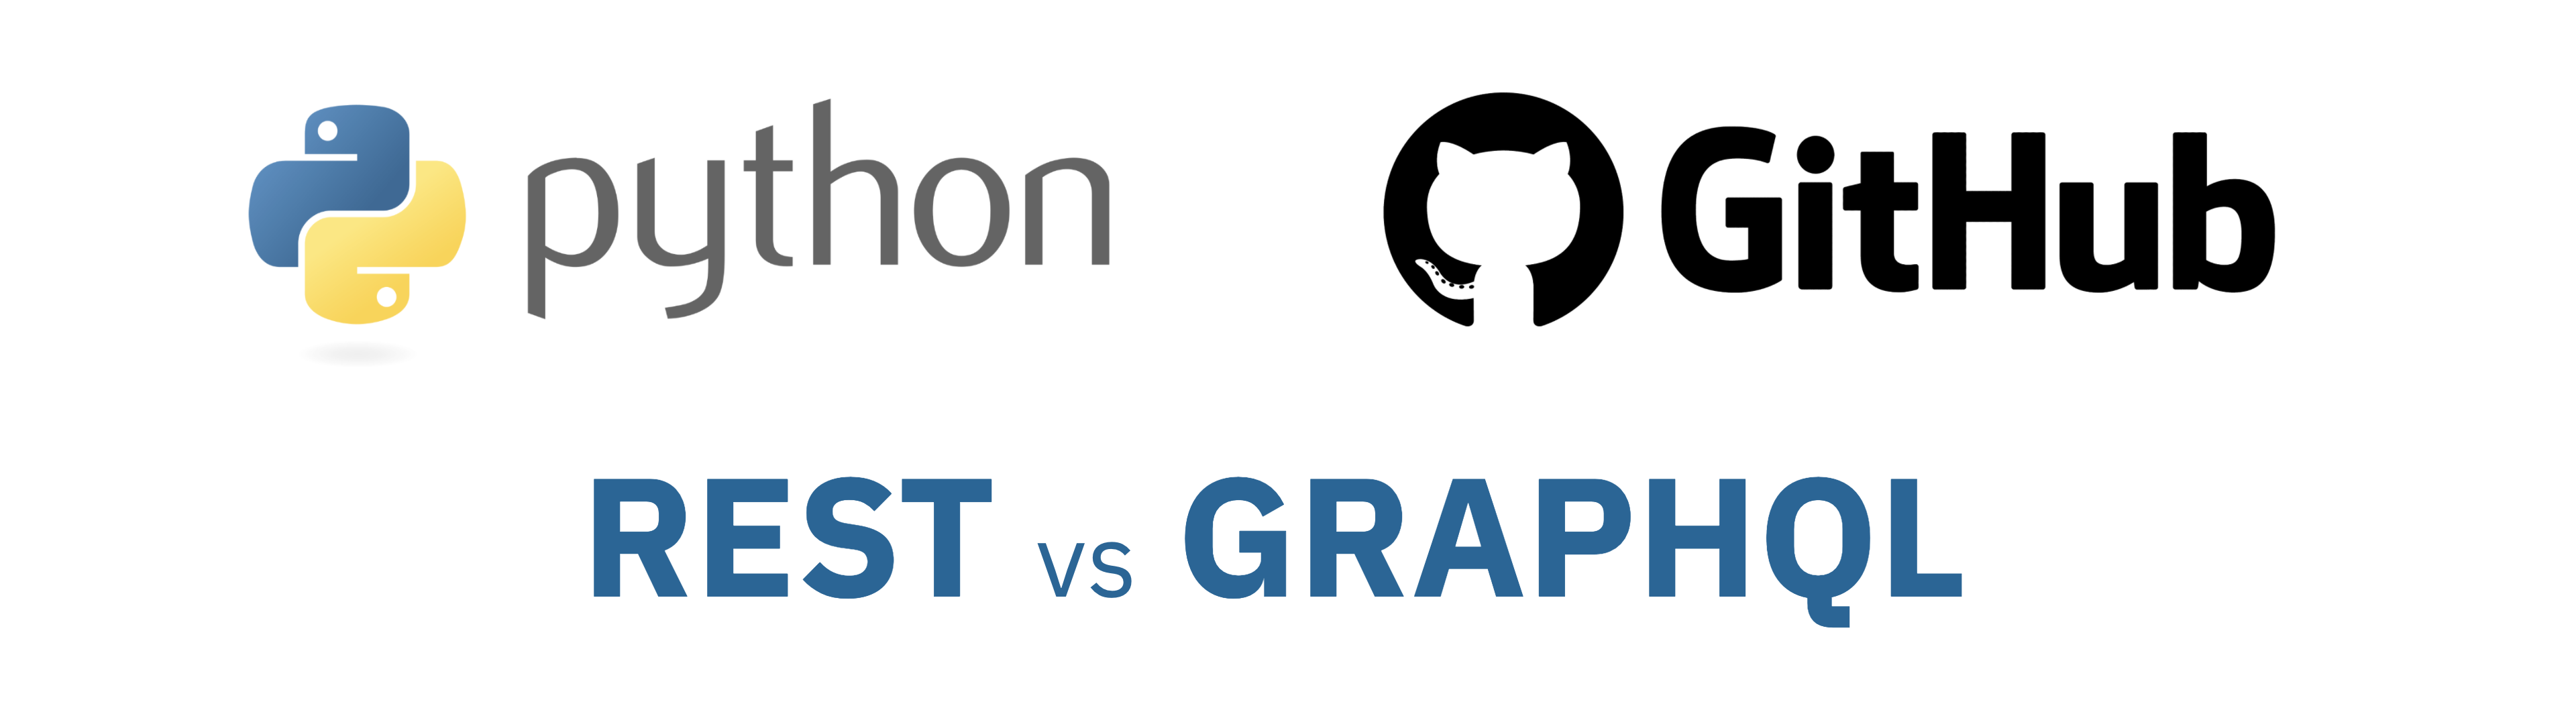 Comparing GitHub’s REST and GraphQL APIs